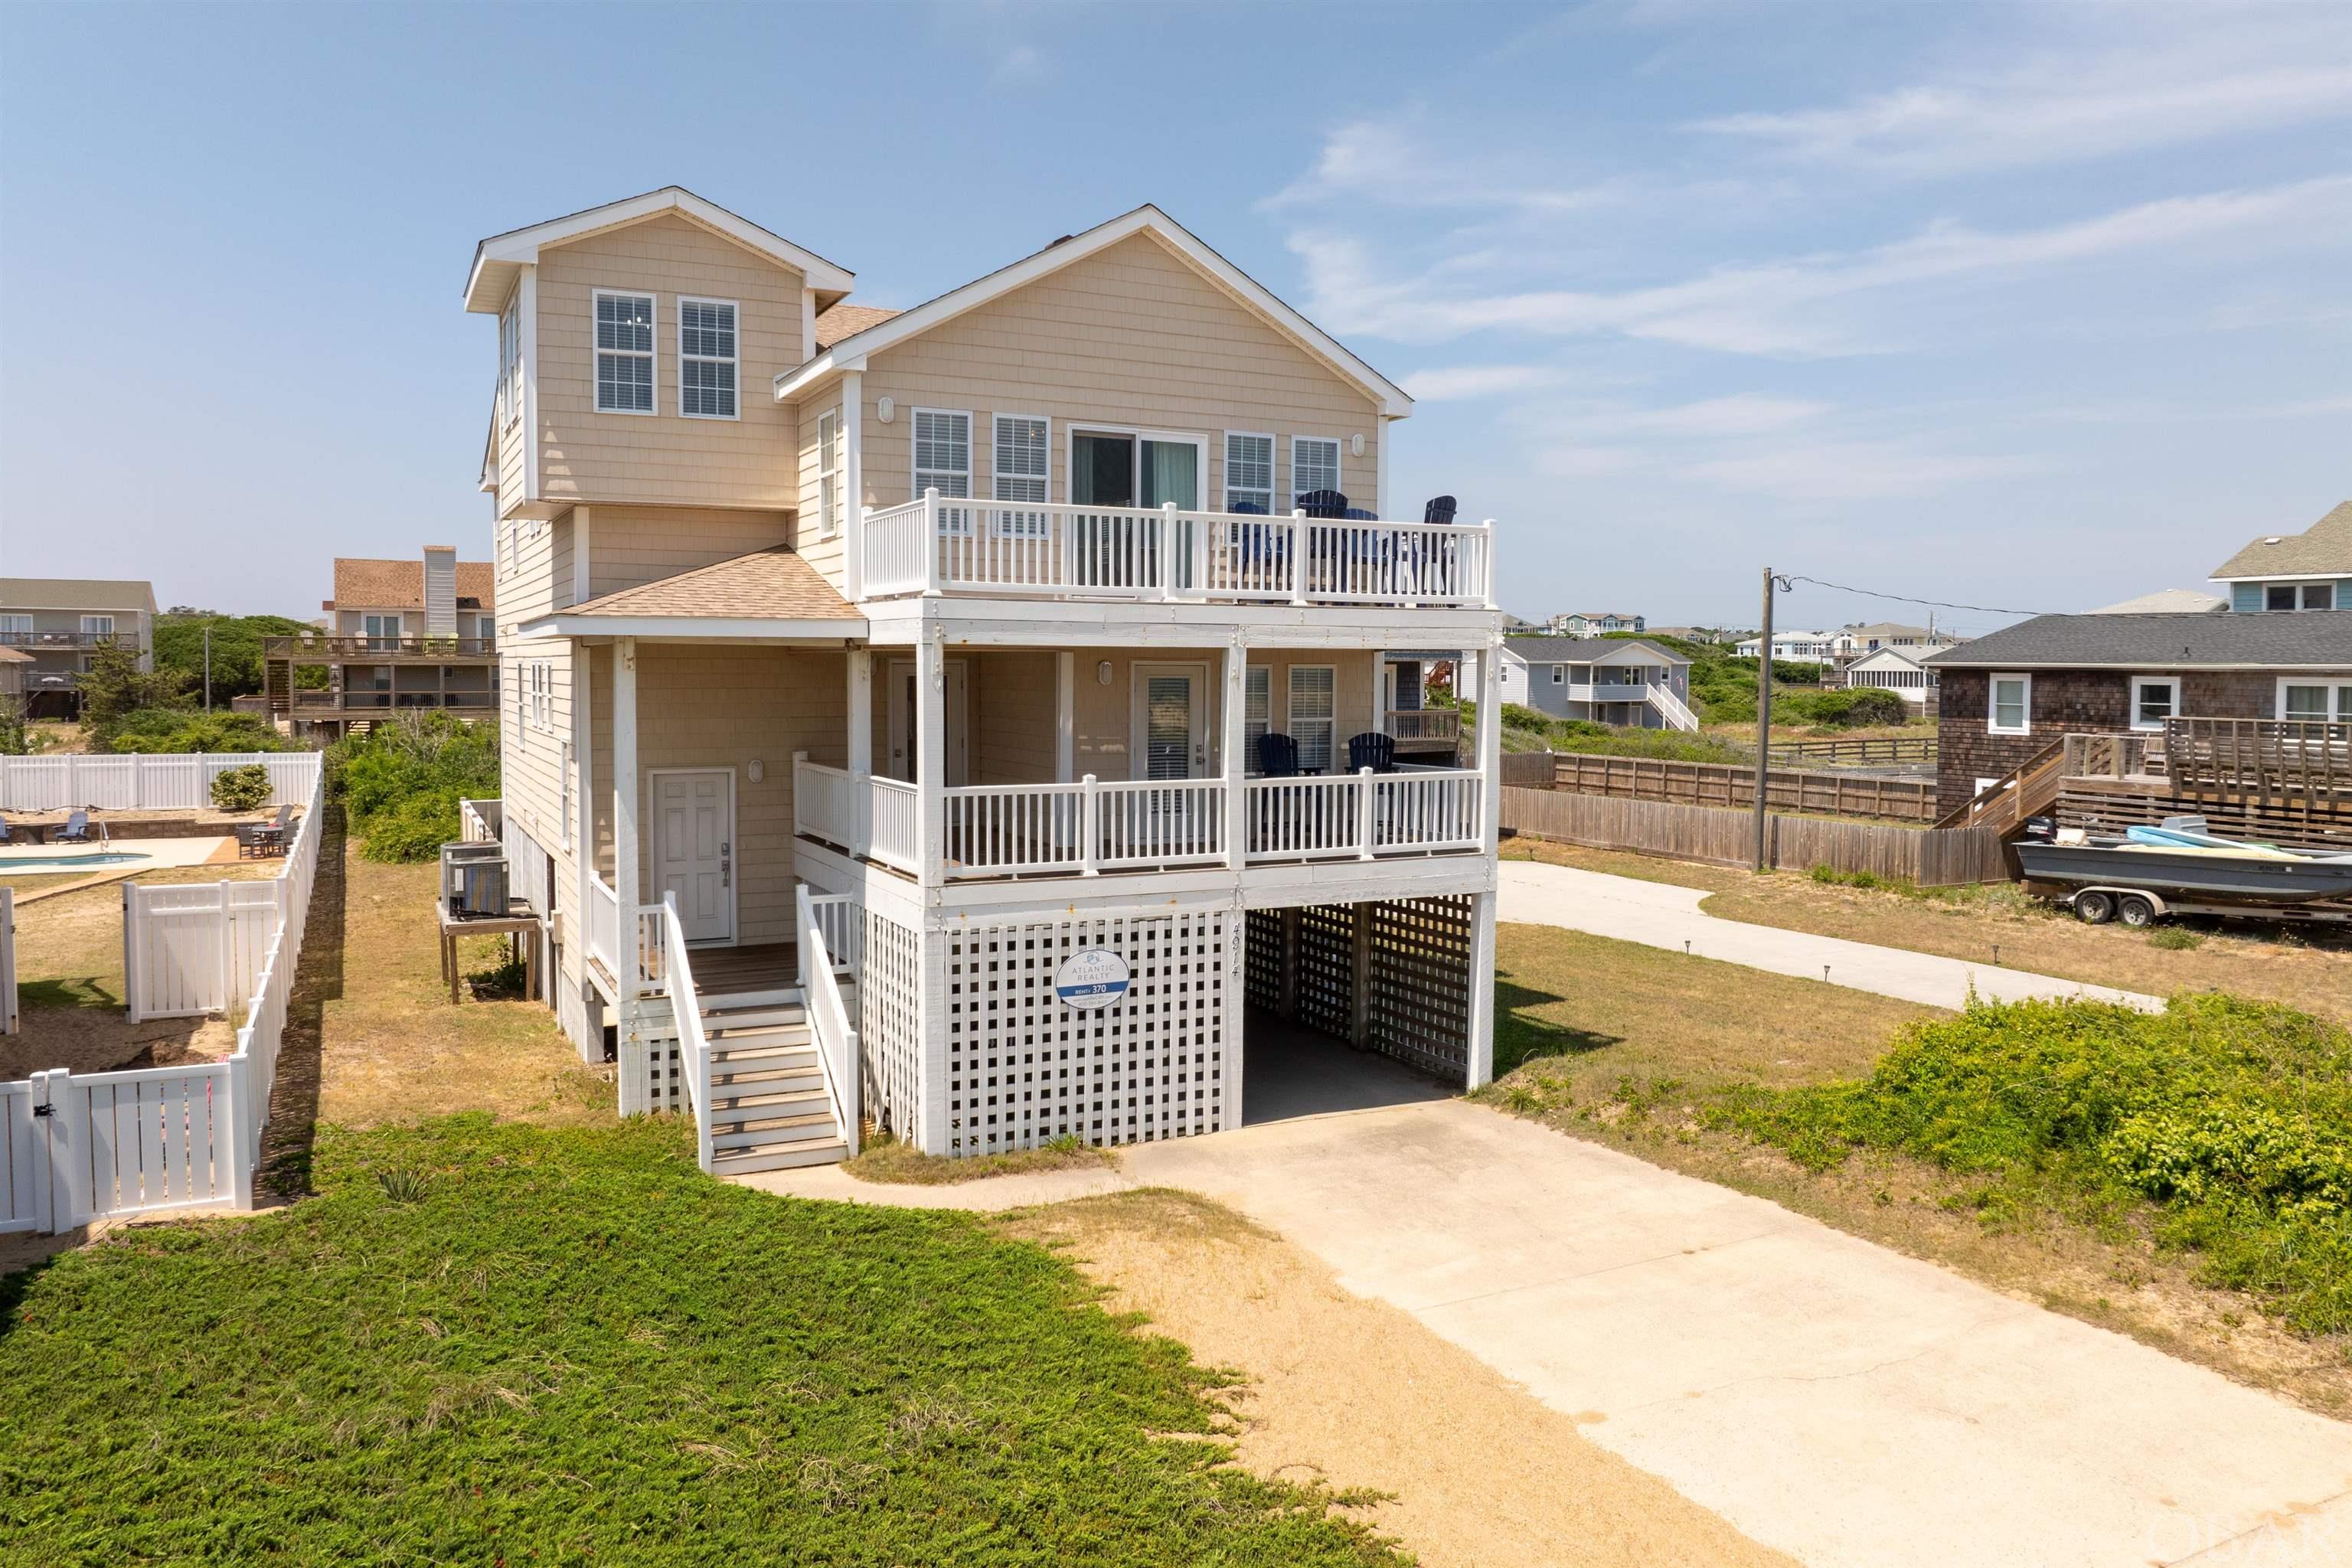 Experience luxury beach living in the heart of the Outer Banks, semi oceanfront in Kitty Hawk. This spacious and well equipped vacation rental property has all of the amenities that make for the perfect oceanside getaway. The views from the top level living area are what really makes this home spectacular. Enjoy the ocean breezes from multiple levels of spacious decks, or take a dip in the private pool after a long day at the beach. Currently a rental property, this home offers the opportunity for a new owner to have a full rental season already booked and the expected income ready to go. Additionally the home offers a recent fortified roof, HVAC updates, 2022 water heater replacement, new 7 person spa and so many other updates you can check off your list! This is a true turn key investment property and a chance to call the beach your second home away from home.